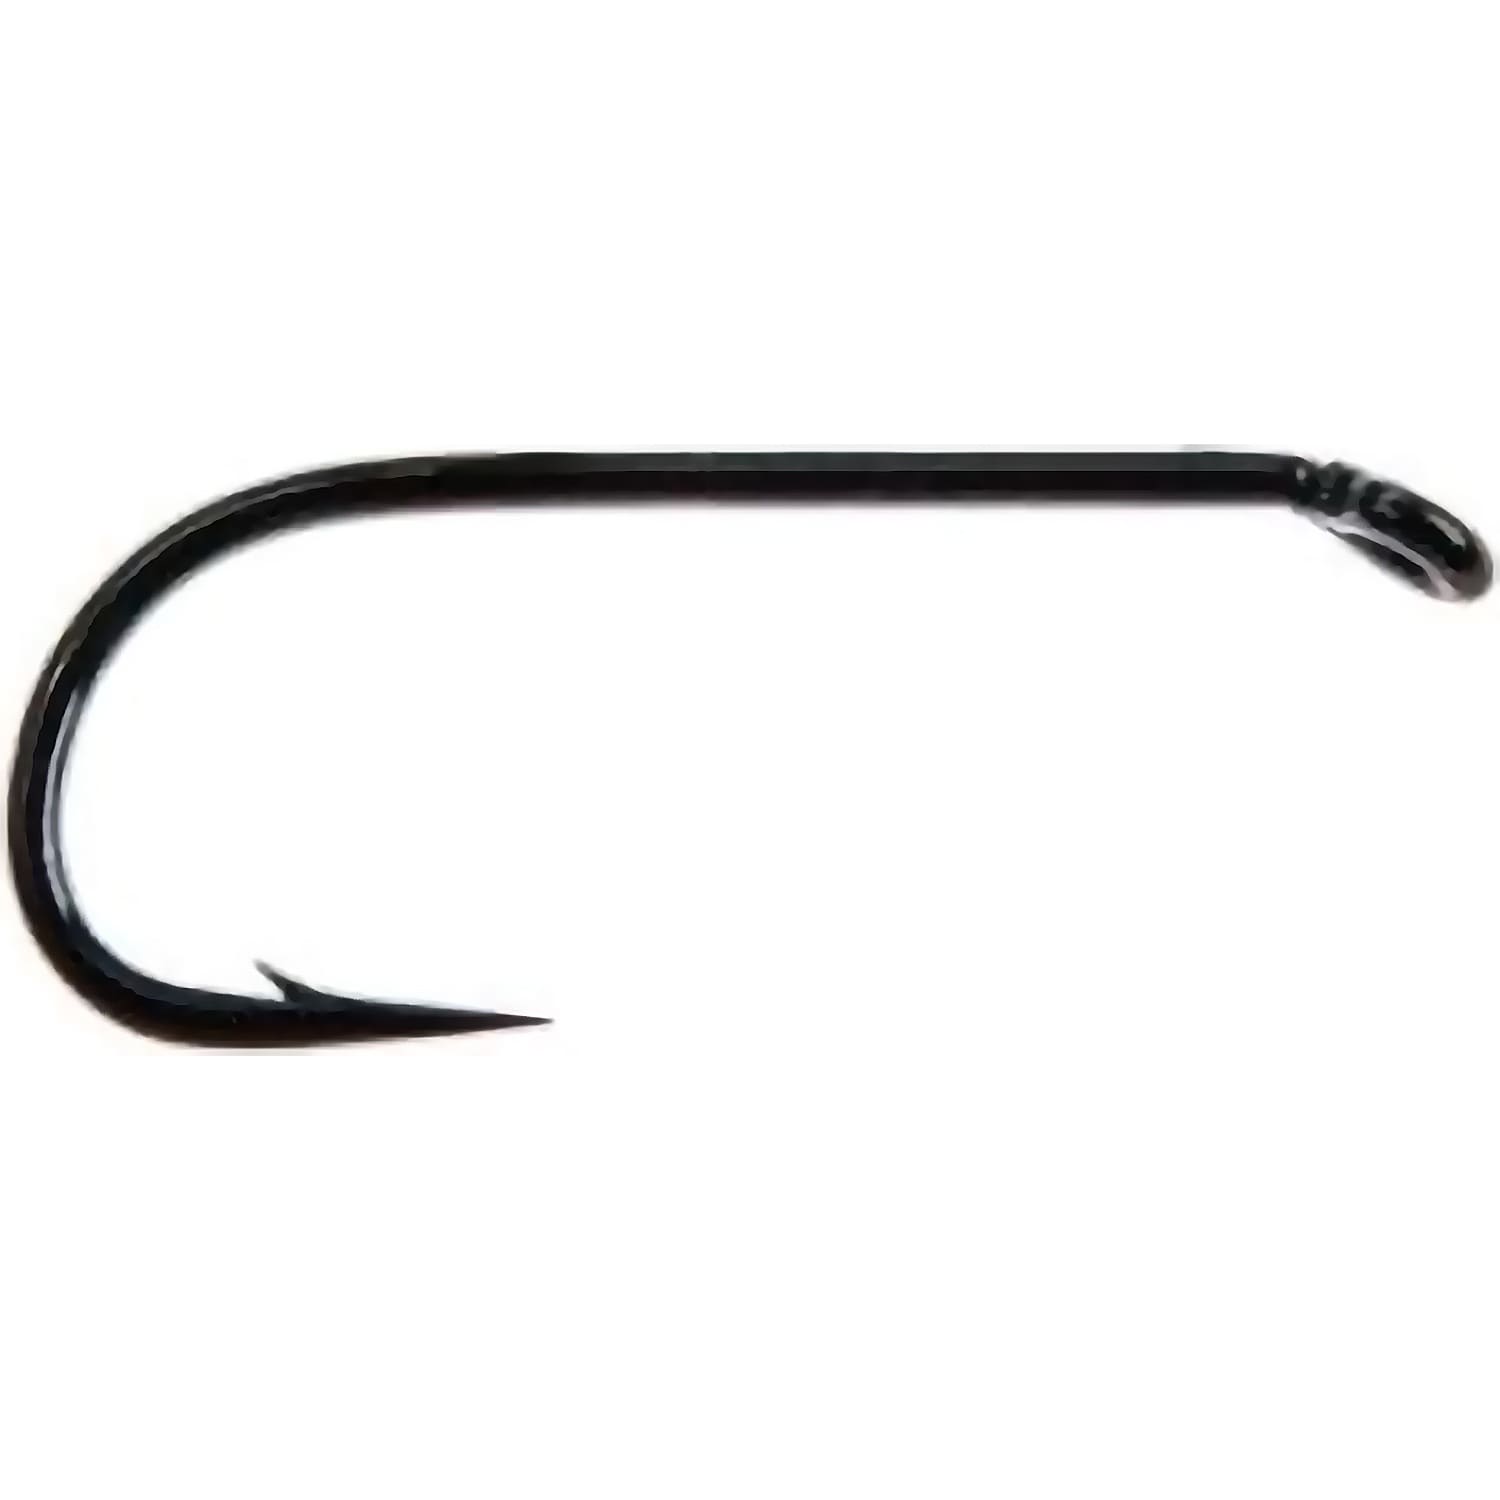 Ahrex® Dry Fly Traditional Hook – 24-Pack